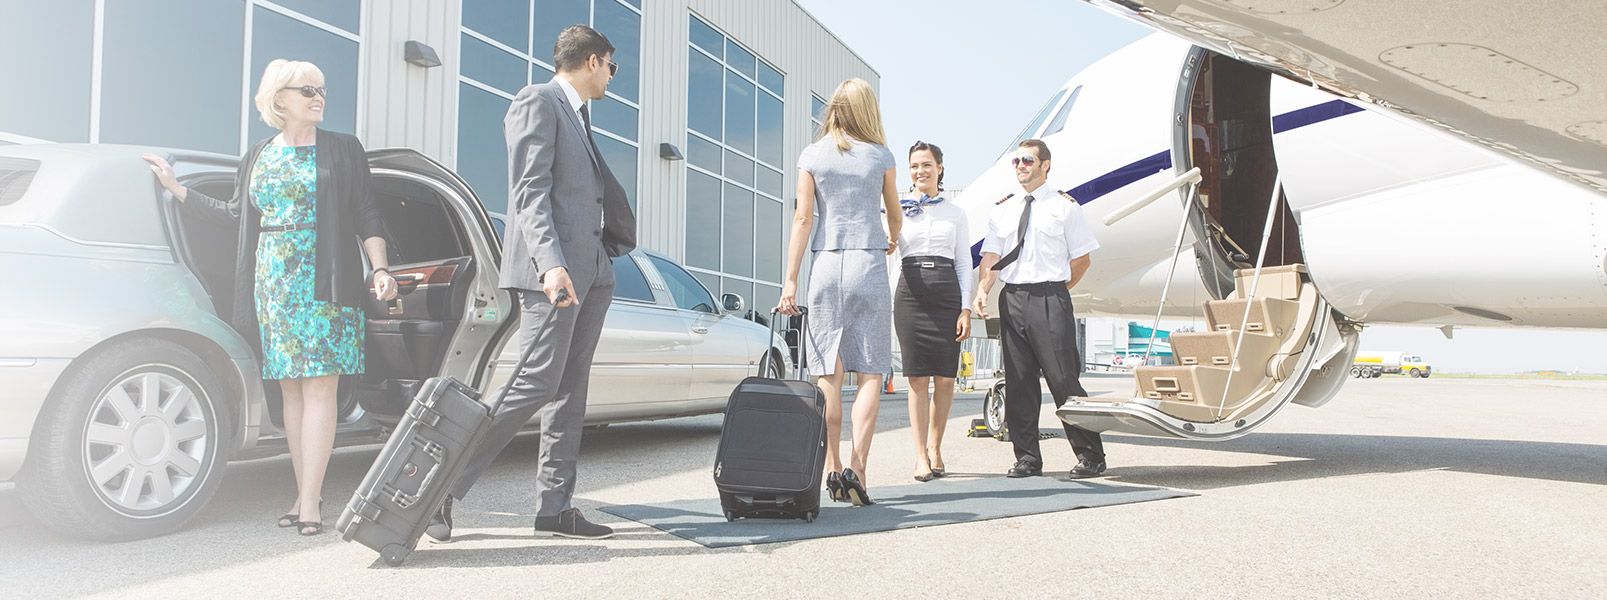 executive travel meaning